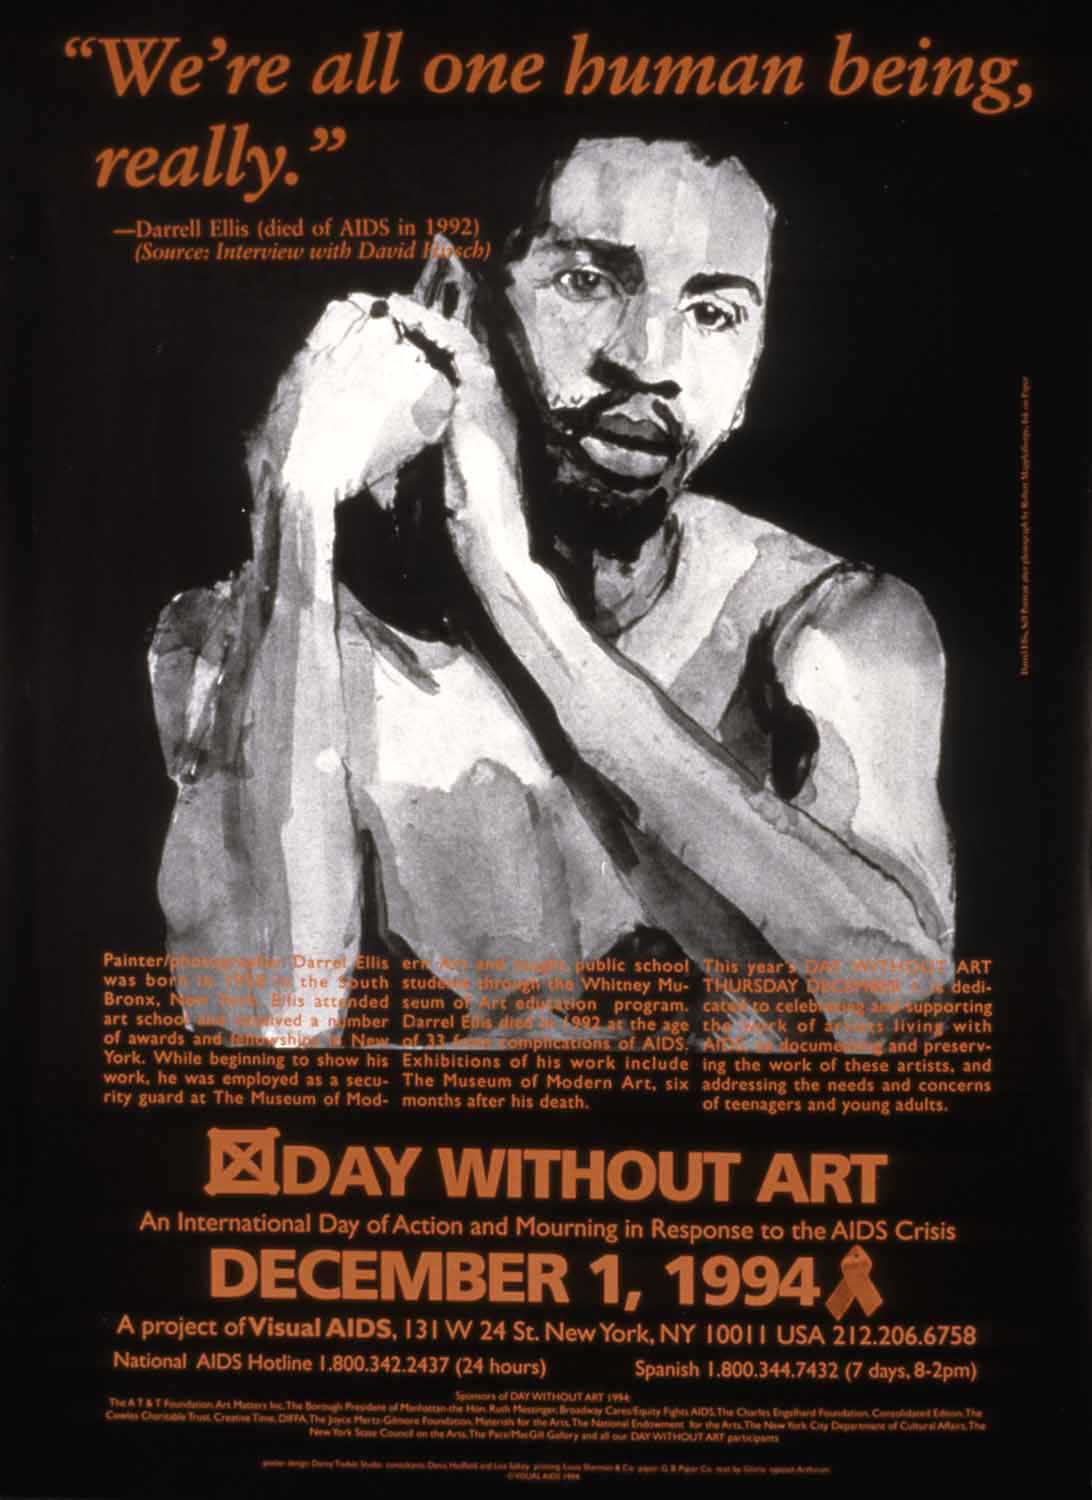 DAY WITHOUT ART POSTERS — Visual AIDS